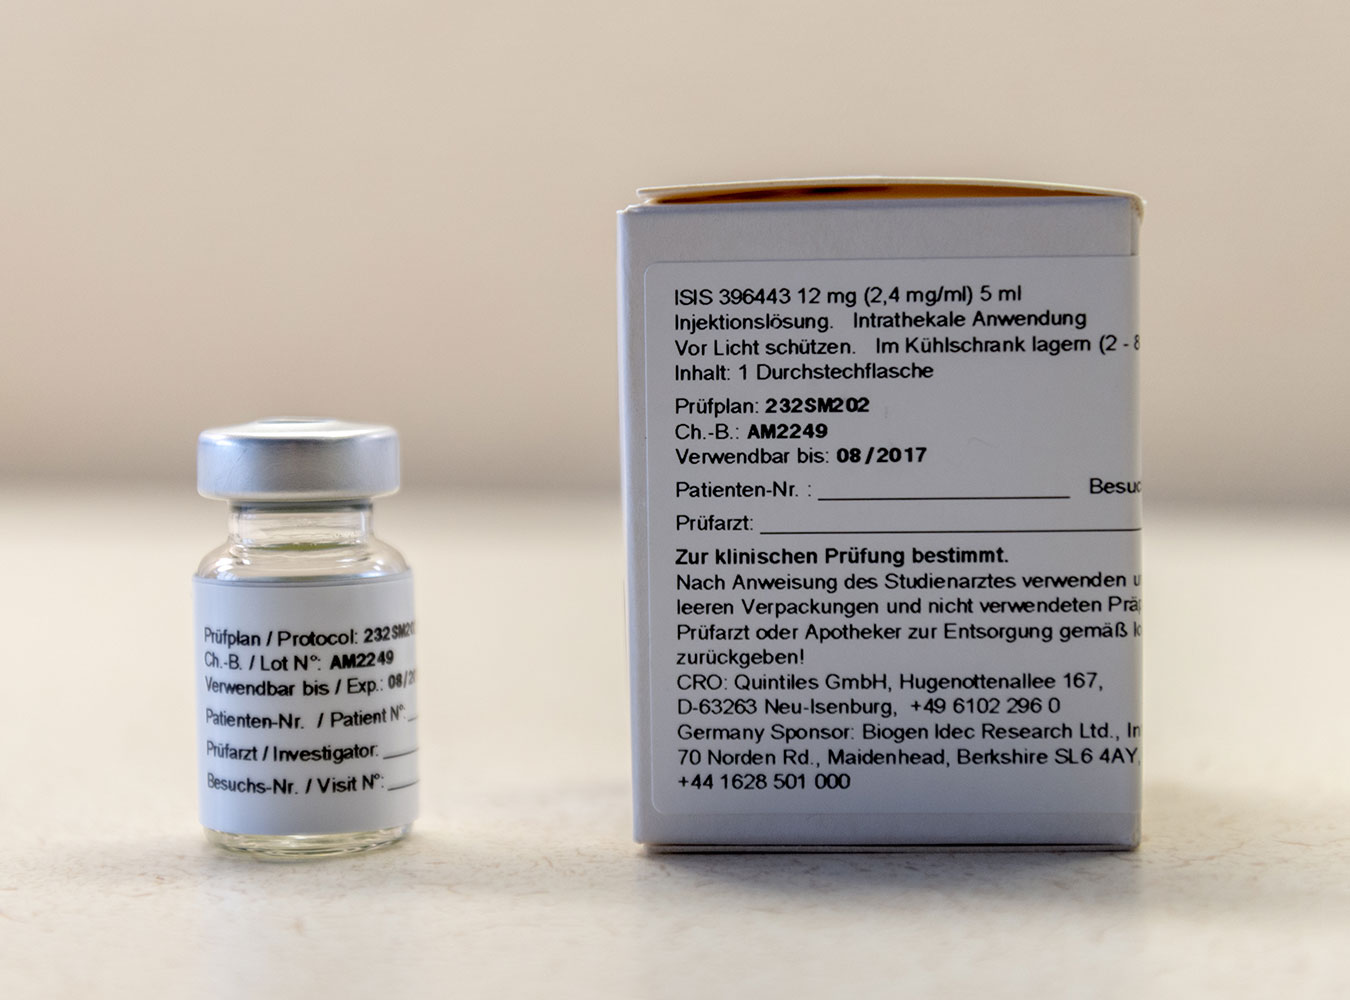 A vial and box of Spinraza.